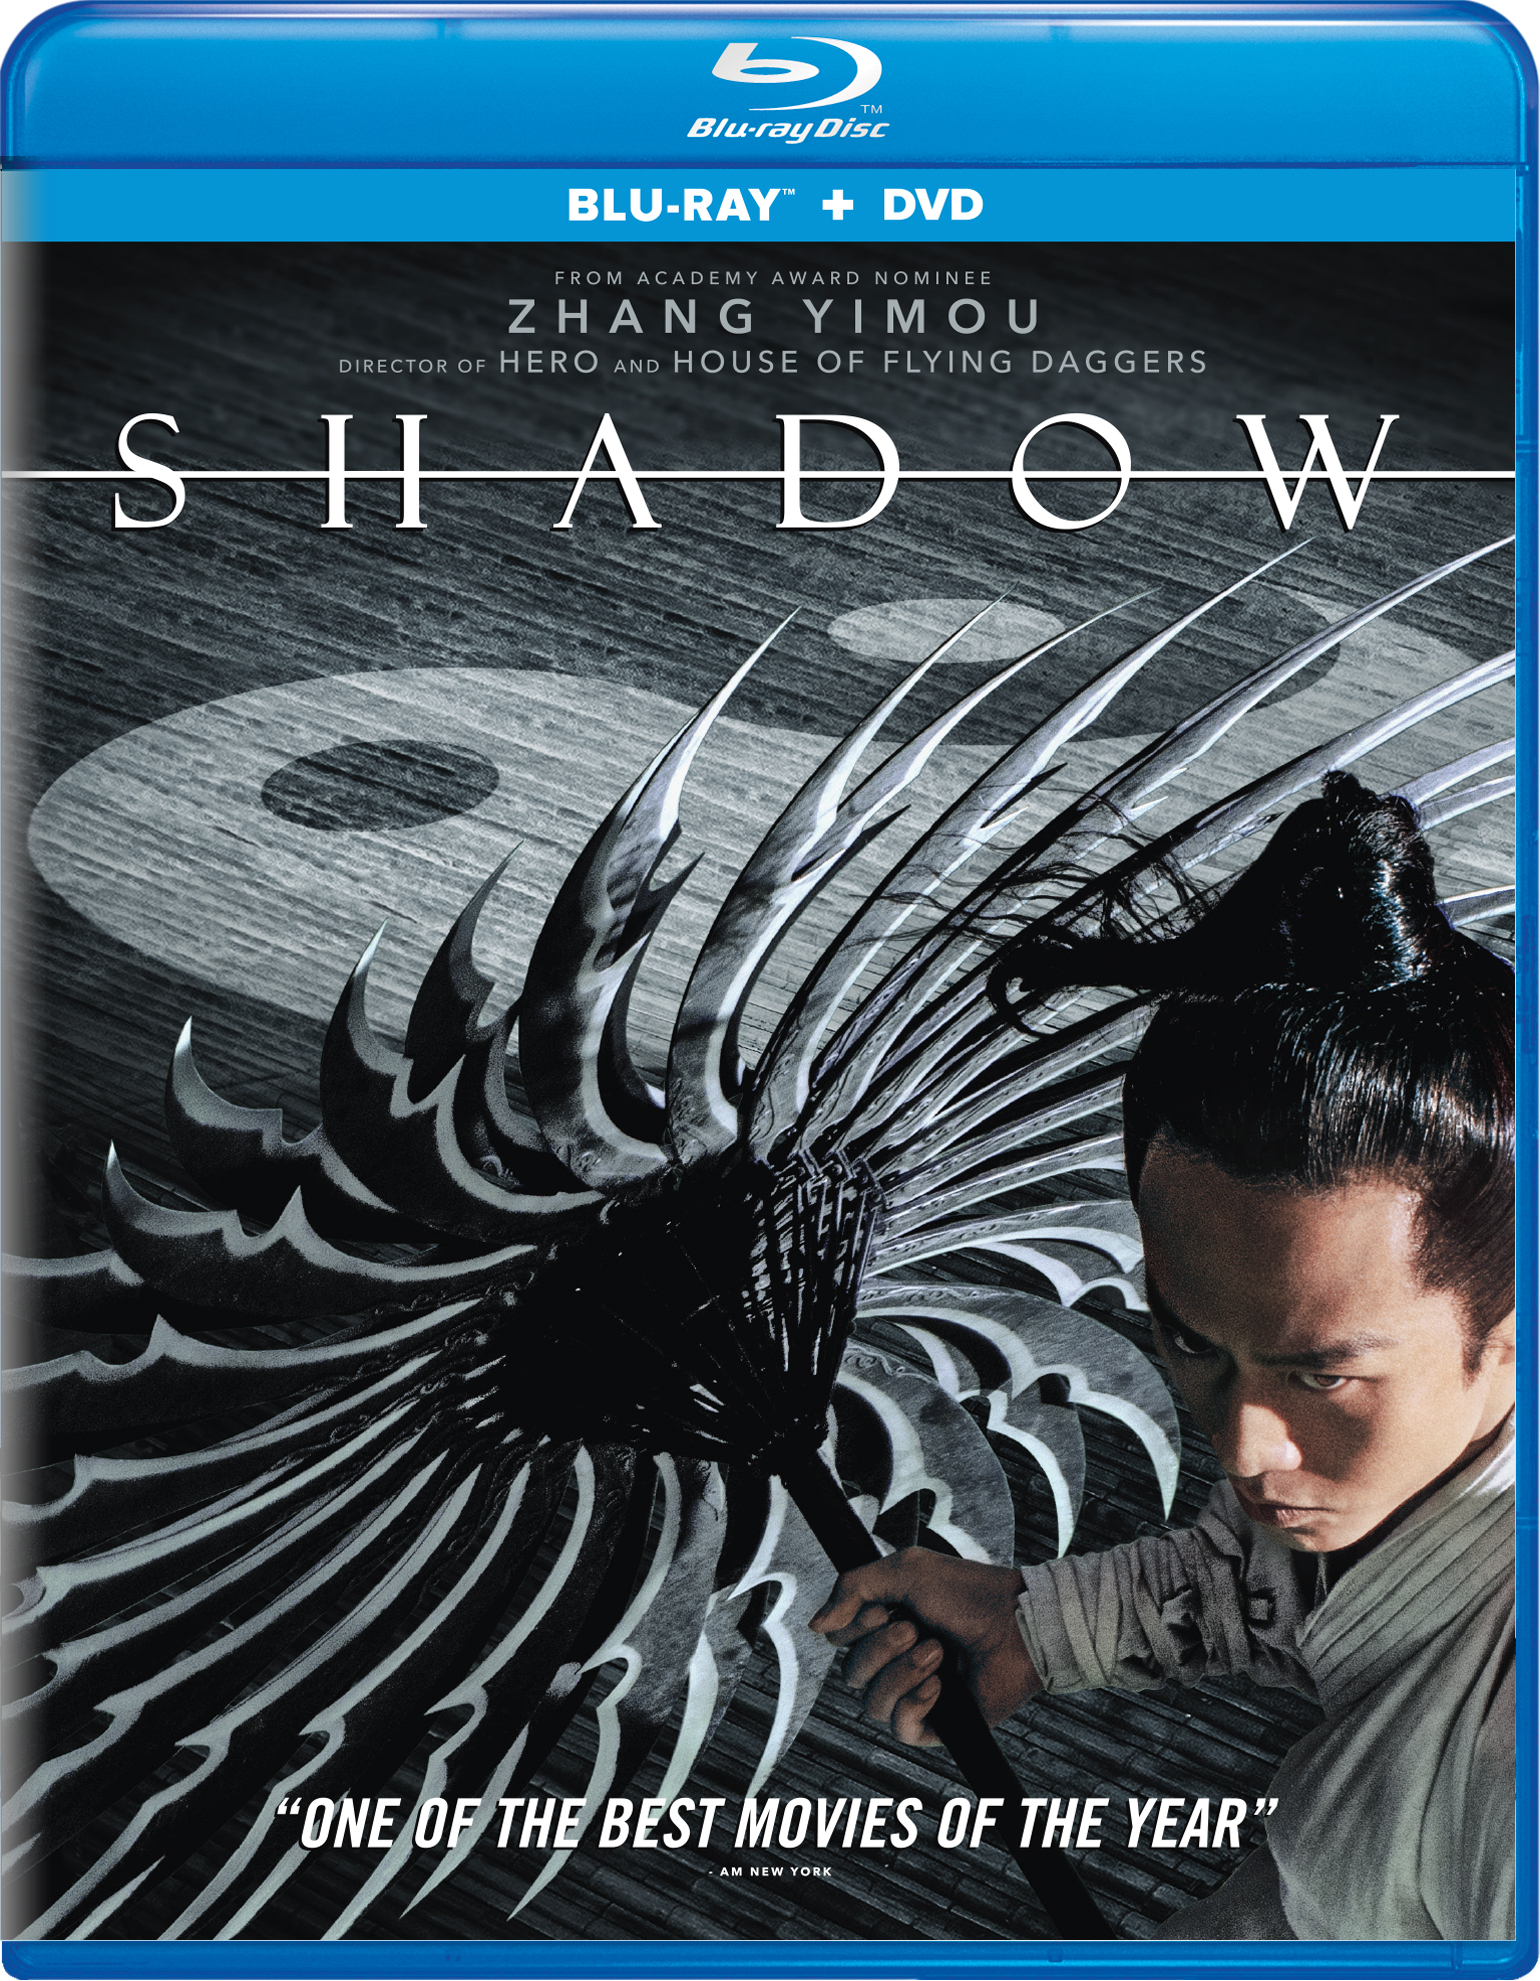 Shadow (with DVD) - Blu-ray [ 2019 ]  - Foreign Movies On Blu-ray - Movies On GRUV